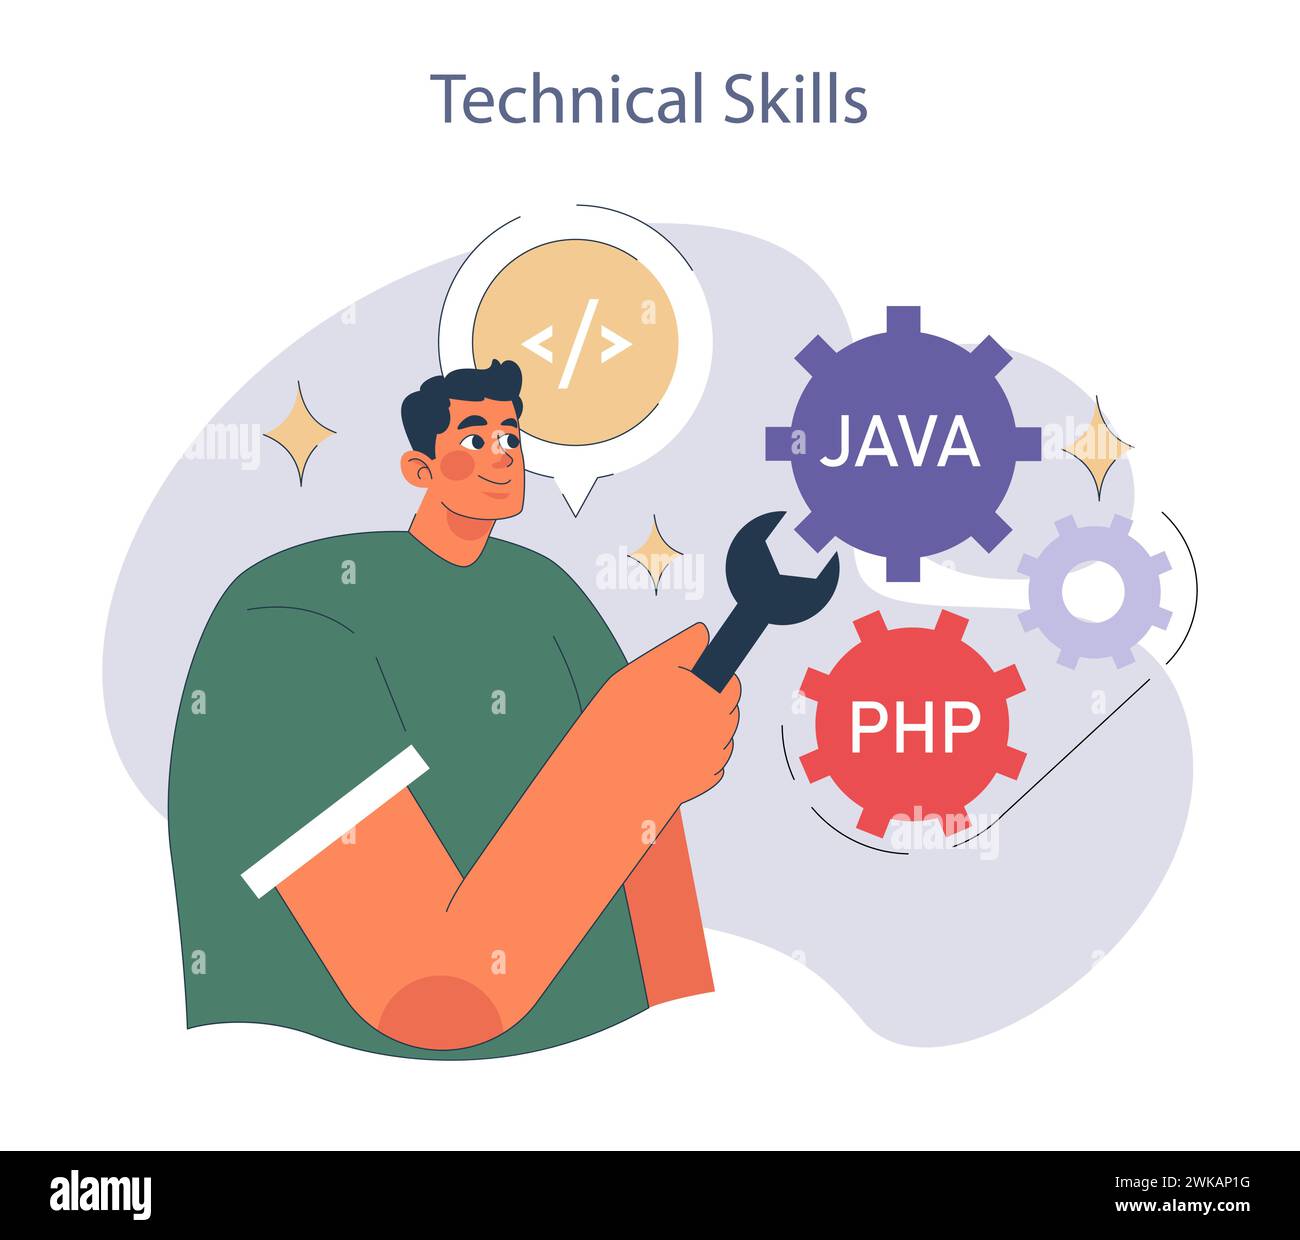 Technical Skills. A confident professional showcasing coding expertise in JAVA and PHP, representing essential technical skills. Stock Vector